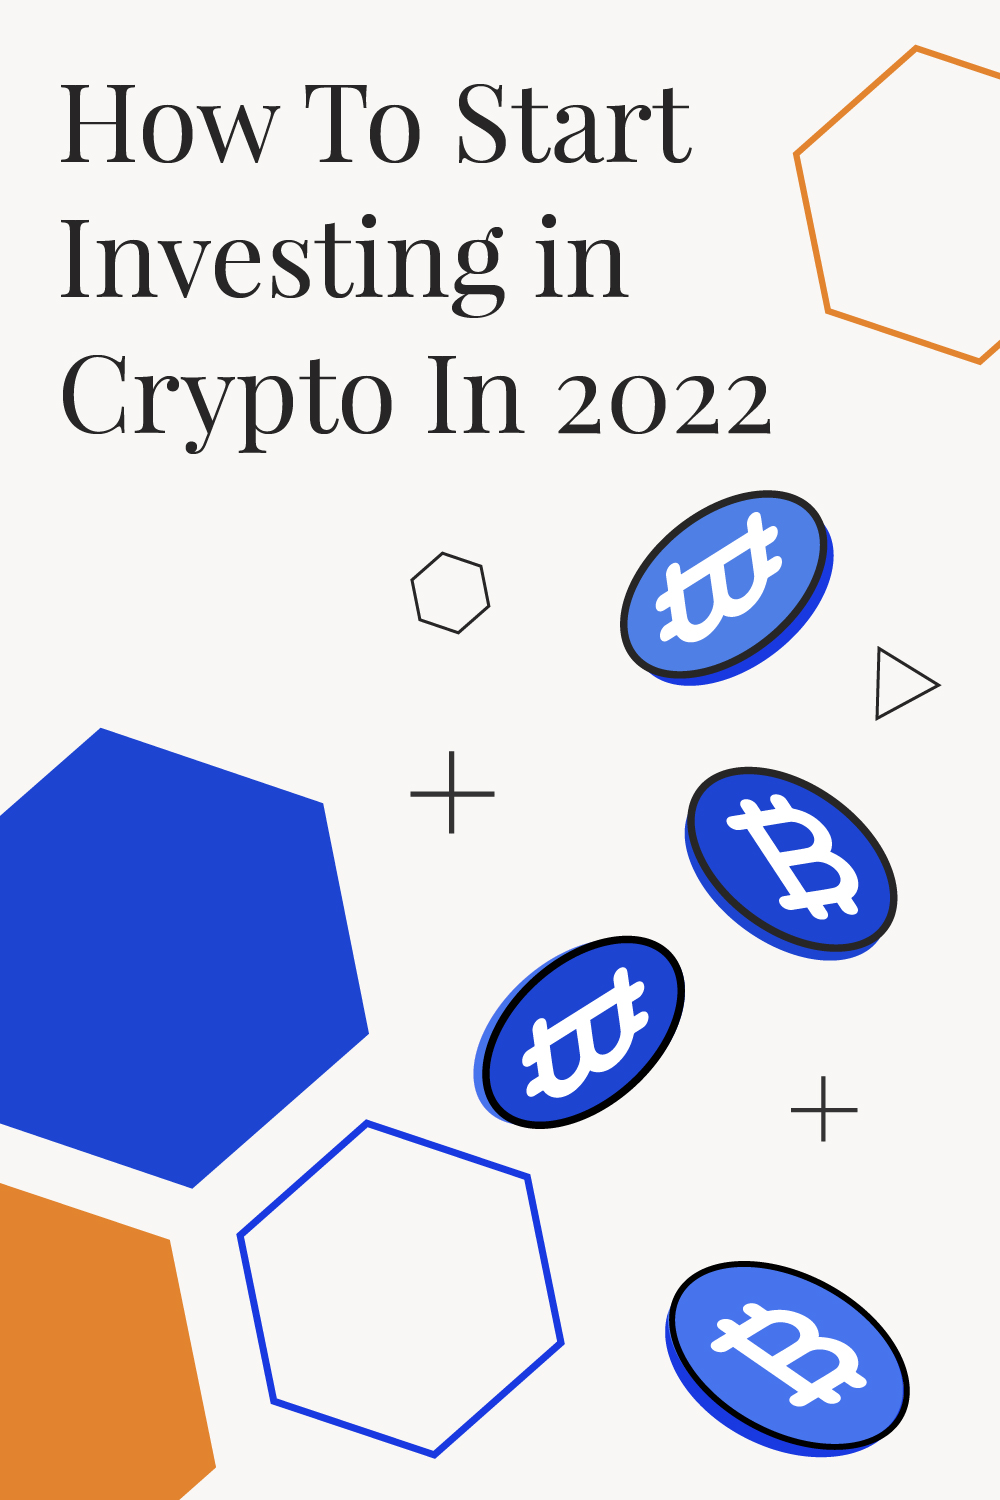 How To Start Investing In Crypto In 2022